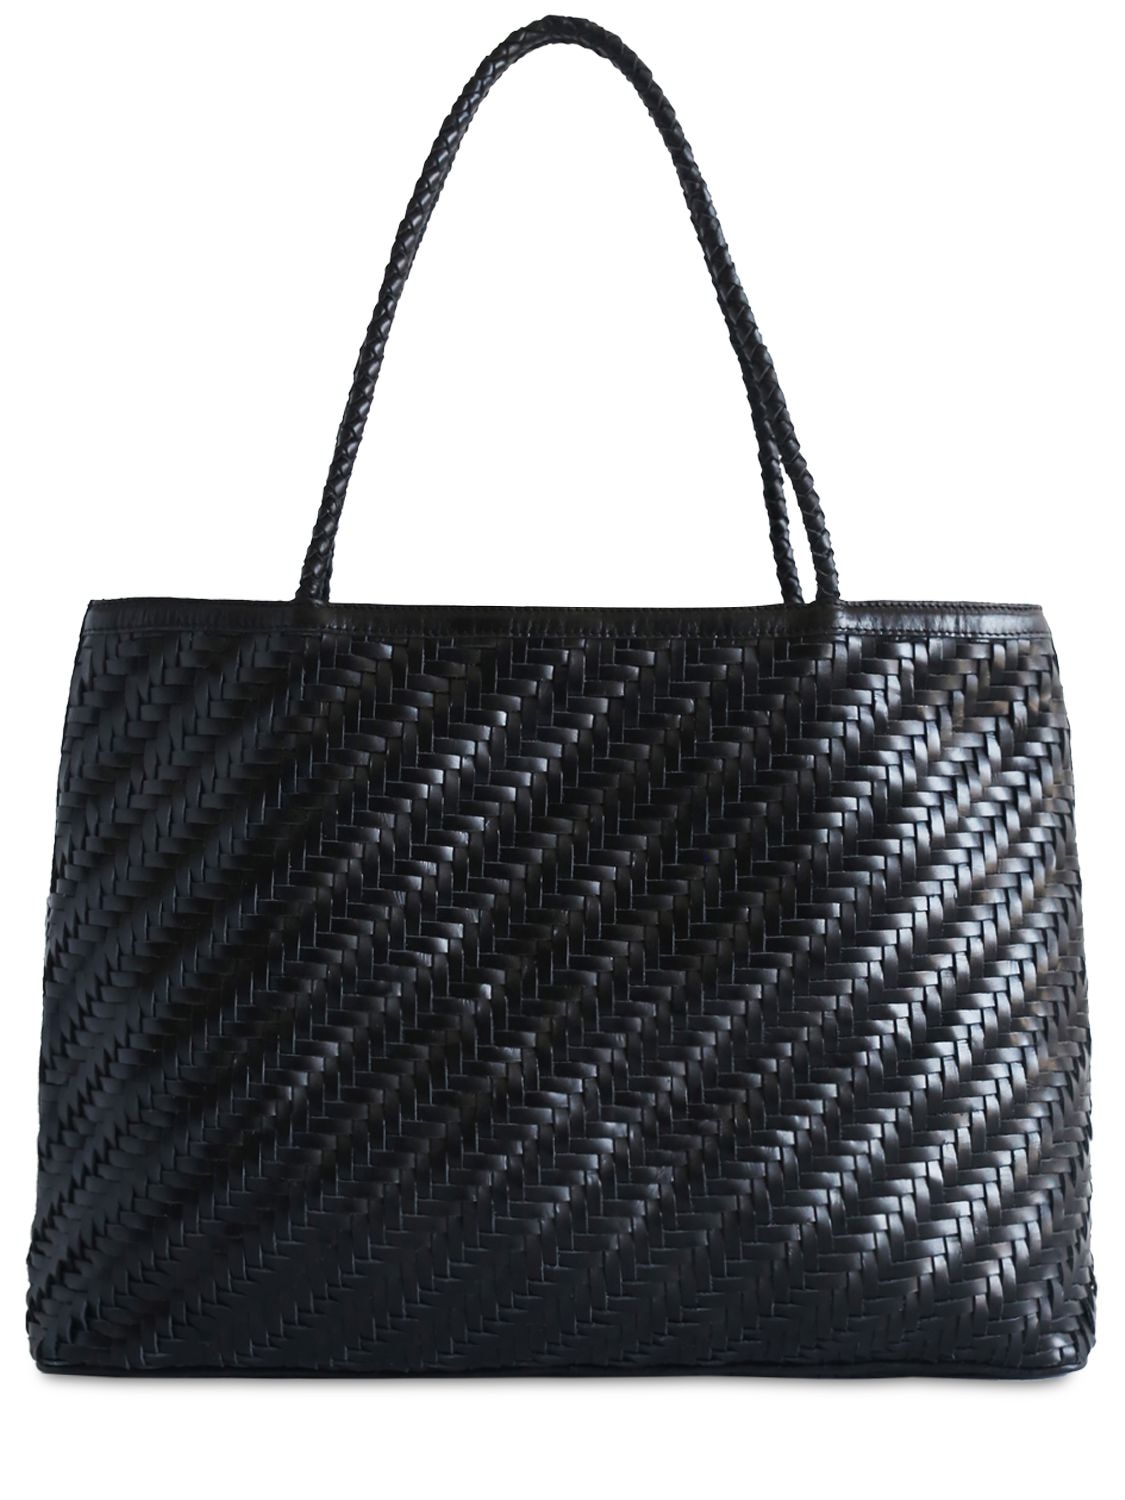 Bembien Gabrielle Leather Tote Bag In Black